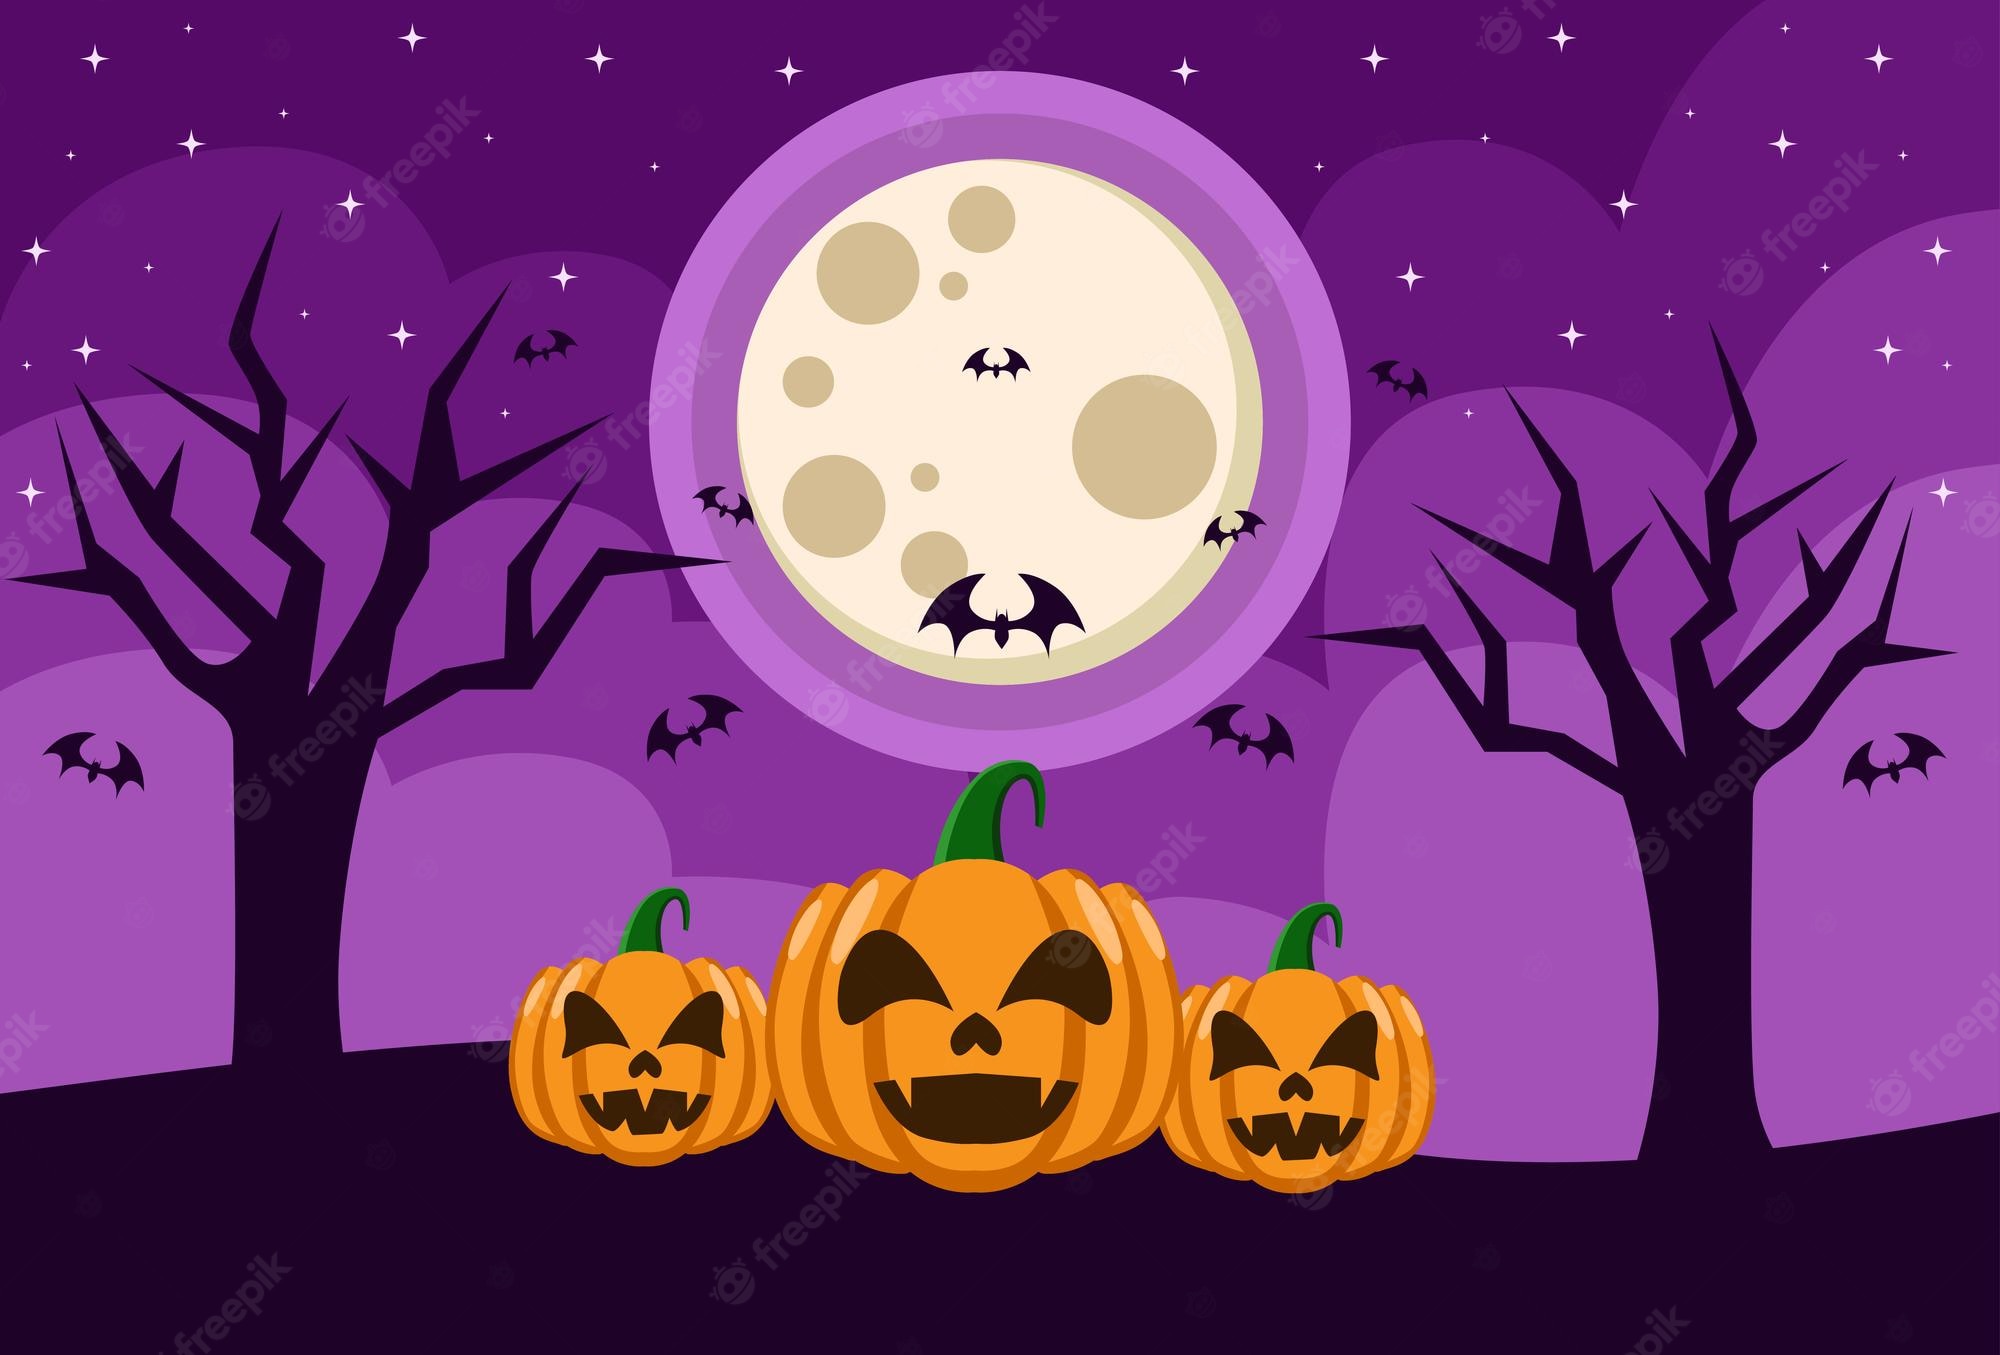 Premium Vector. Happy halloween background design in purple color for banner poster cover and more